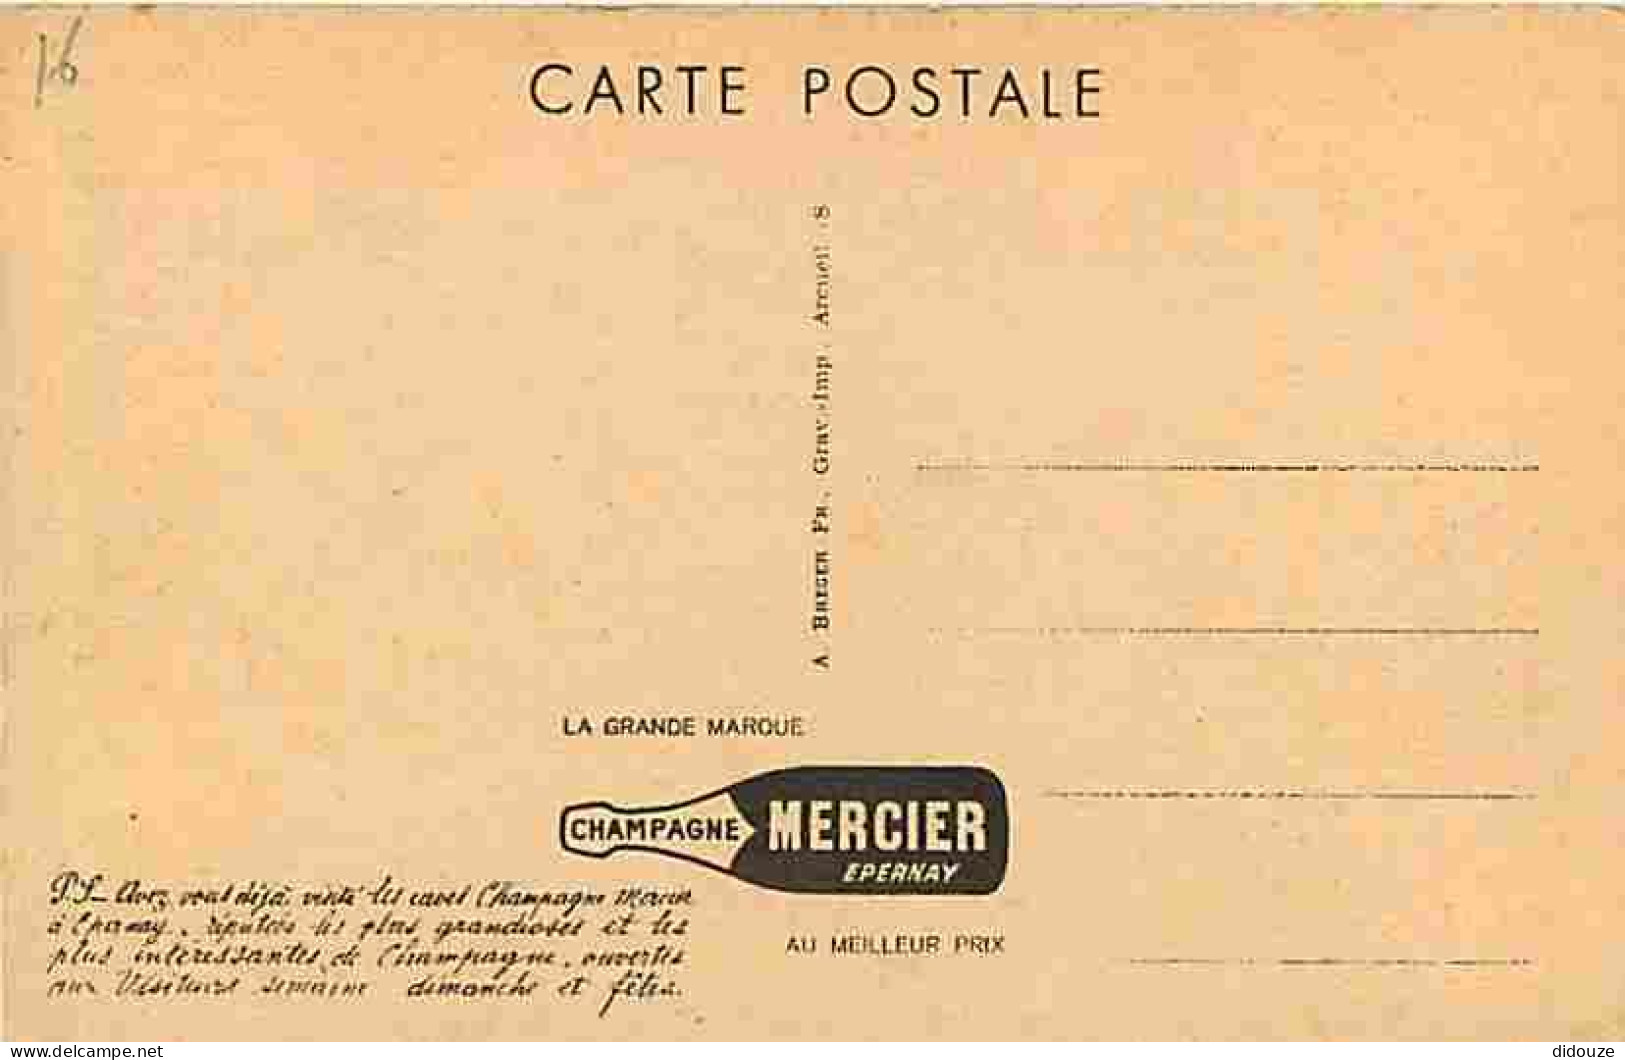 51 - Epernay - Champagne Mercier - Rinçage Des Bouteilles - Animée - CPA - Voir Scans Recto-Verso - Epernay